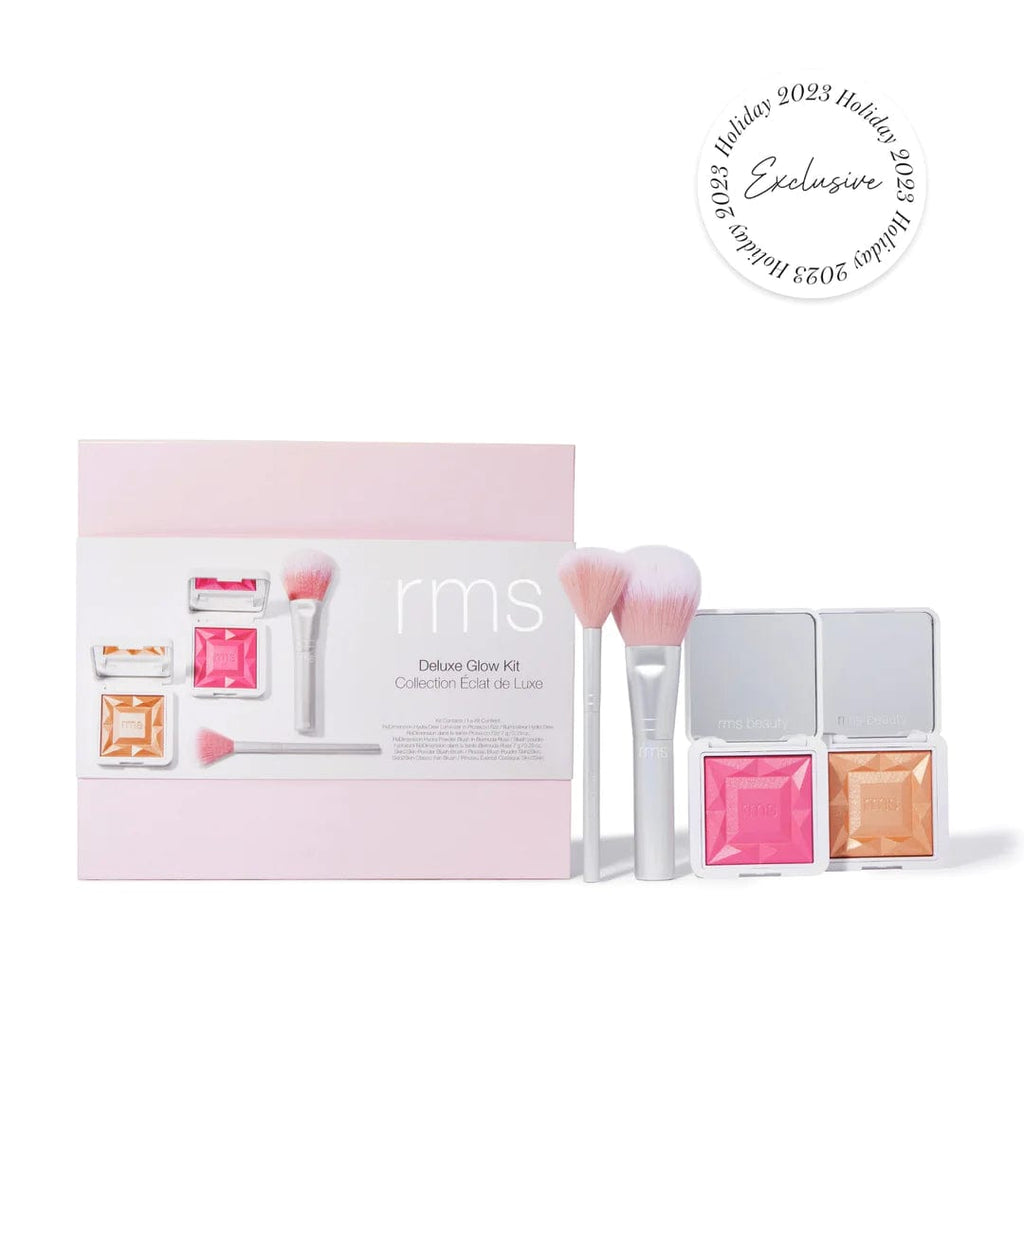 RMS - Deluxe glow kit - The Natural Beauty Club